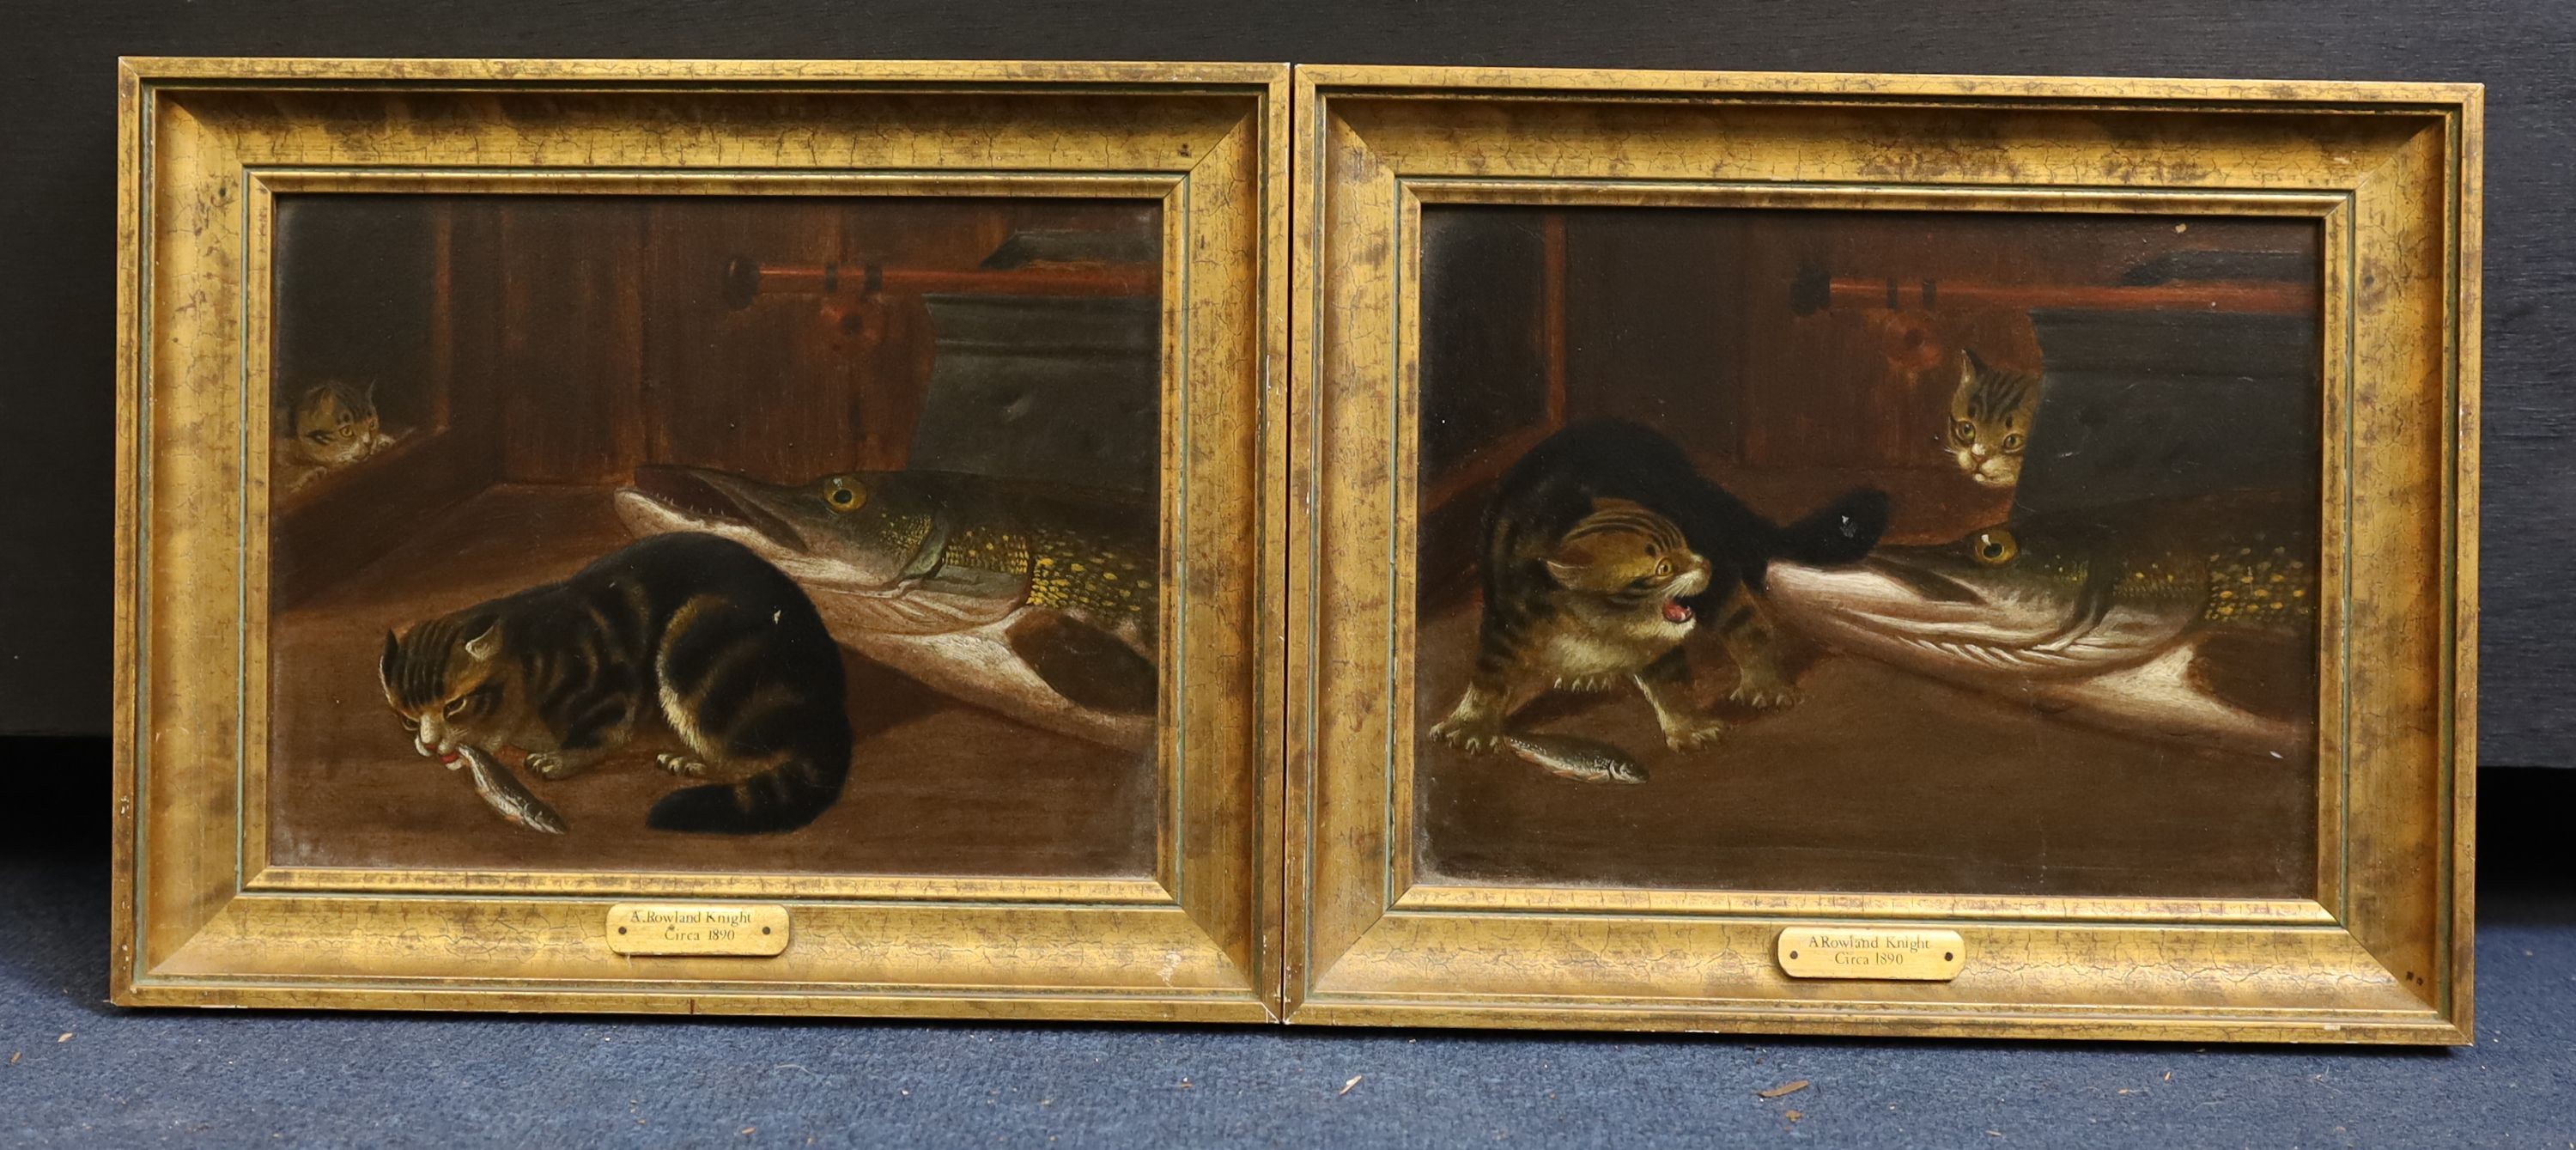 A. Rowland Knight (fl.1810-1840), Cat bitten by a pike, pair of oils on card, x